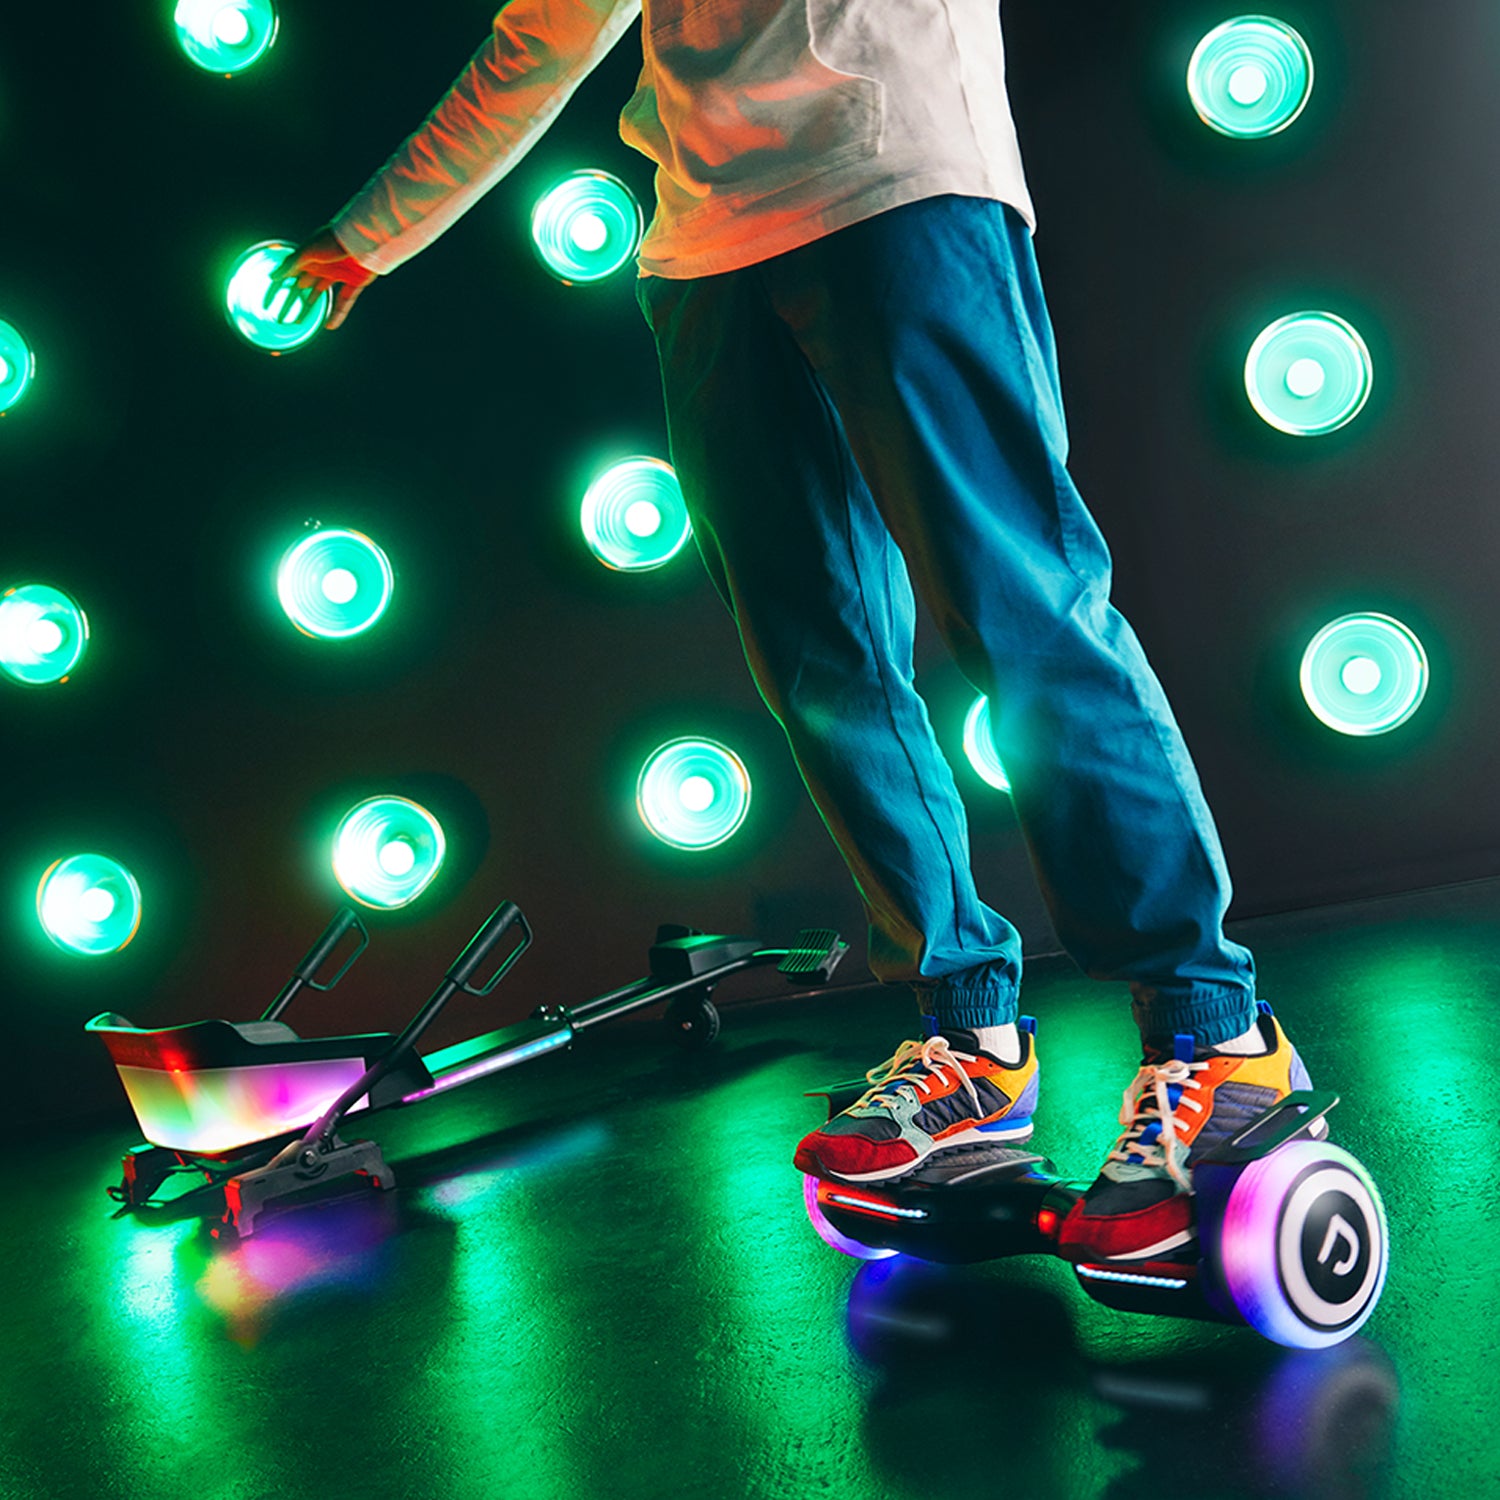 person riding hoverboard in a lit up studio